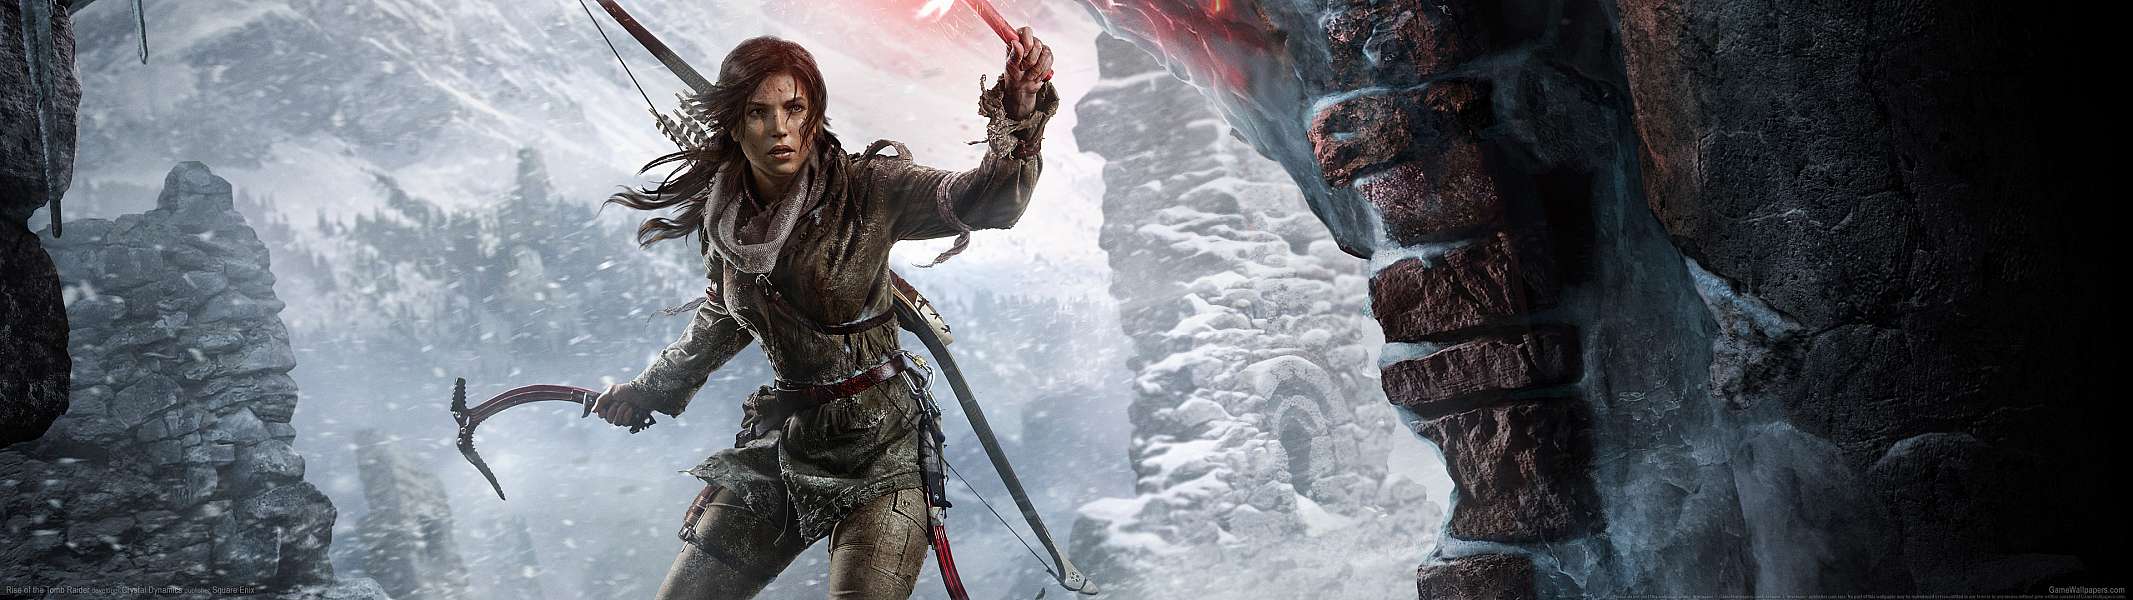 Rise of the Tomb Raider dual screen achtergrond